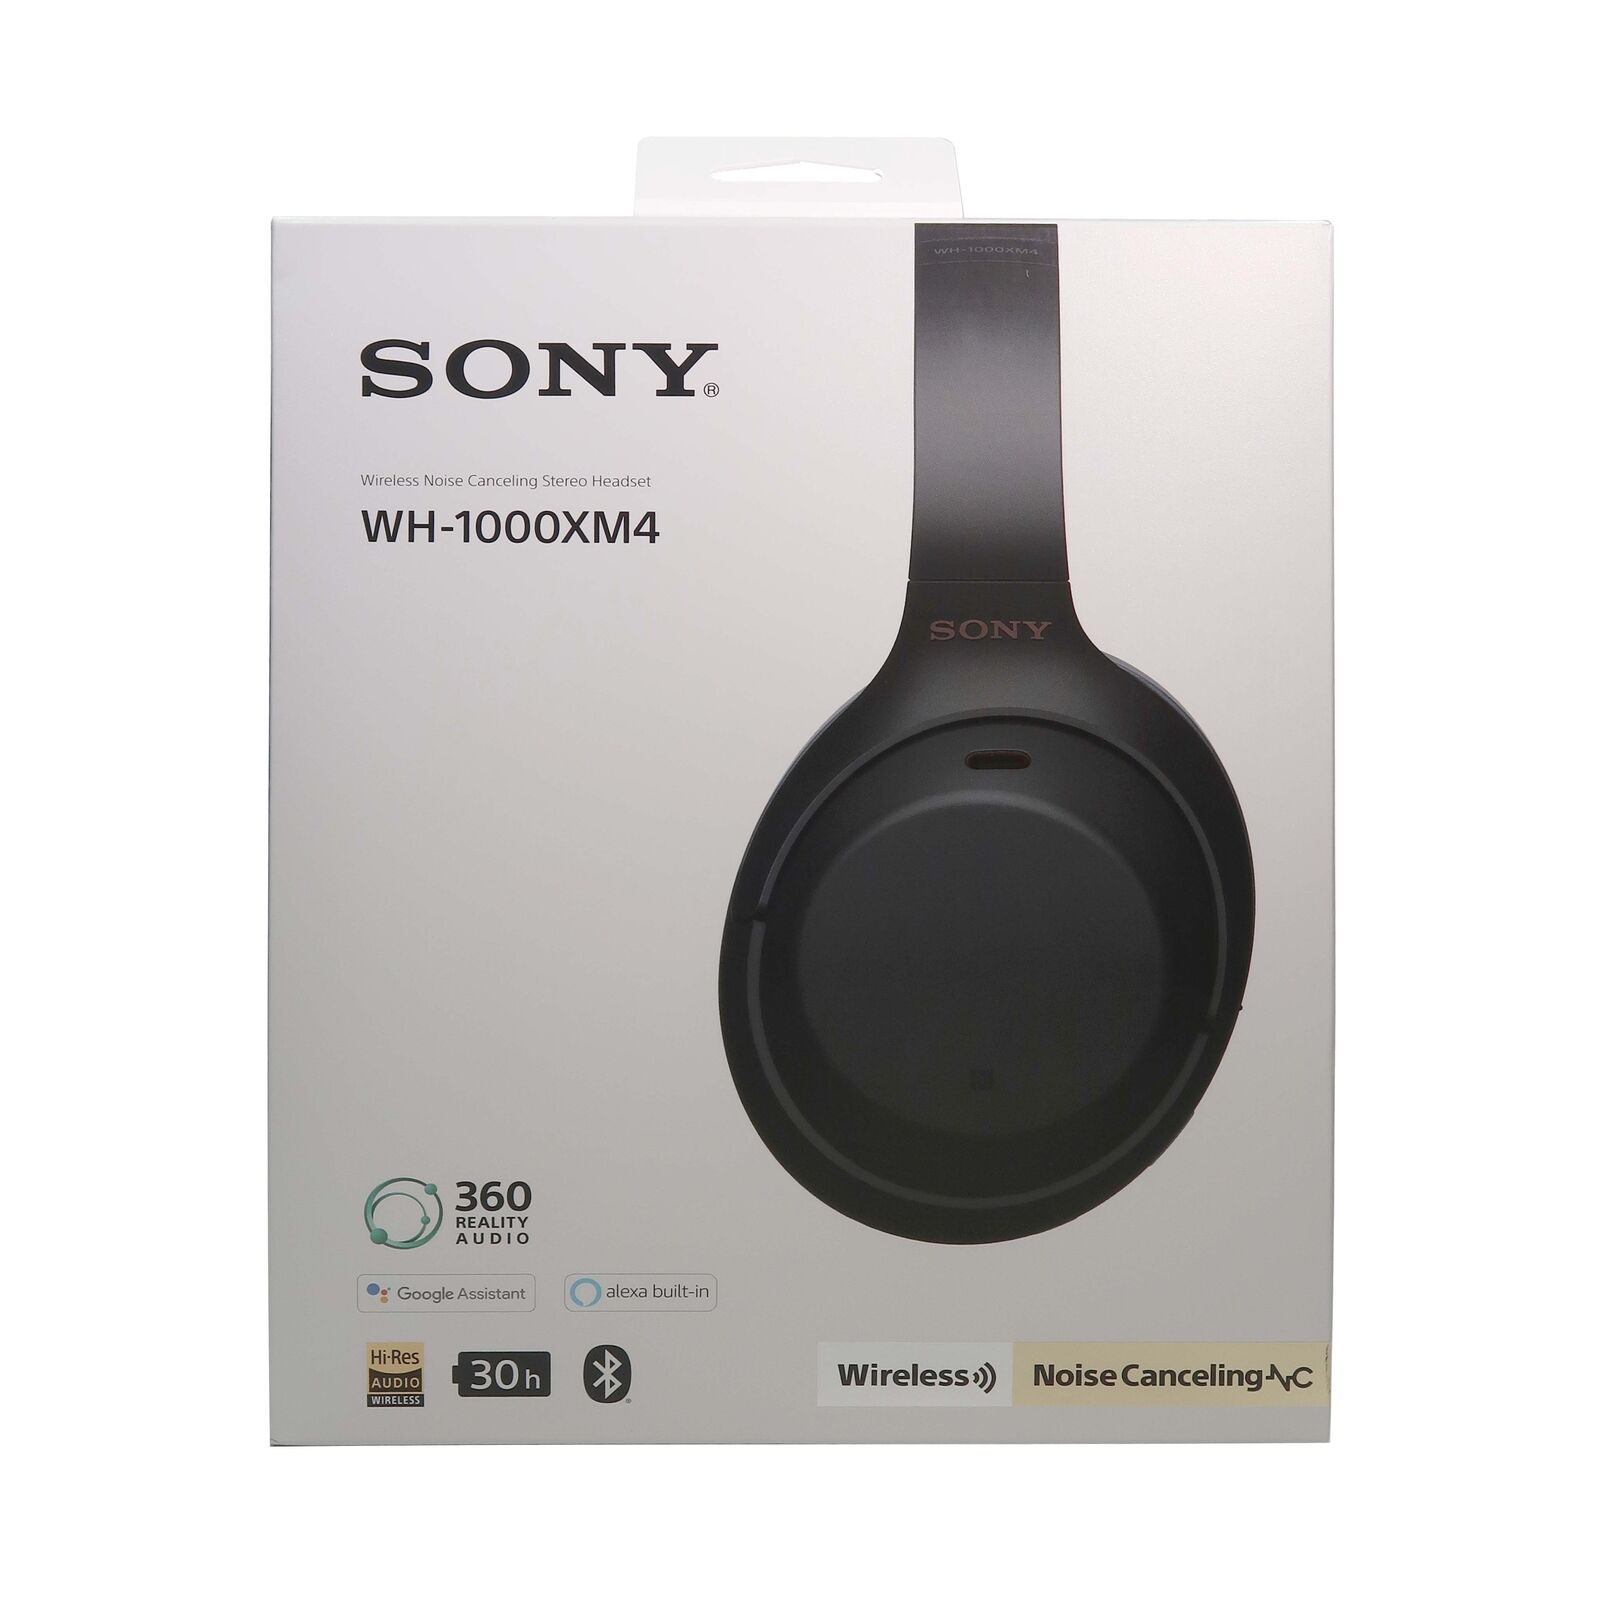 Sony WH-1000XM4 Wireless Over-the-Ear Headphones with JBL T110 in Ear Headphones